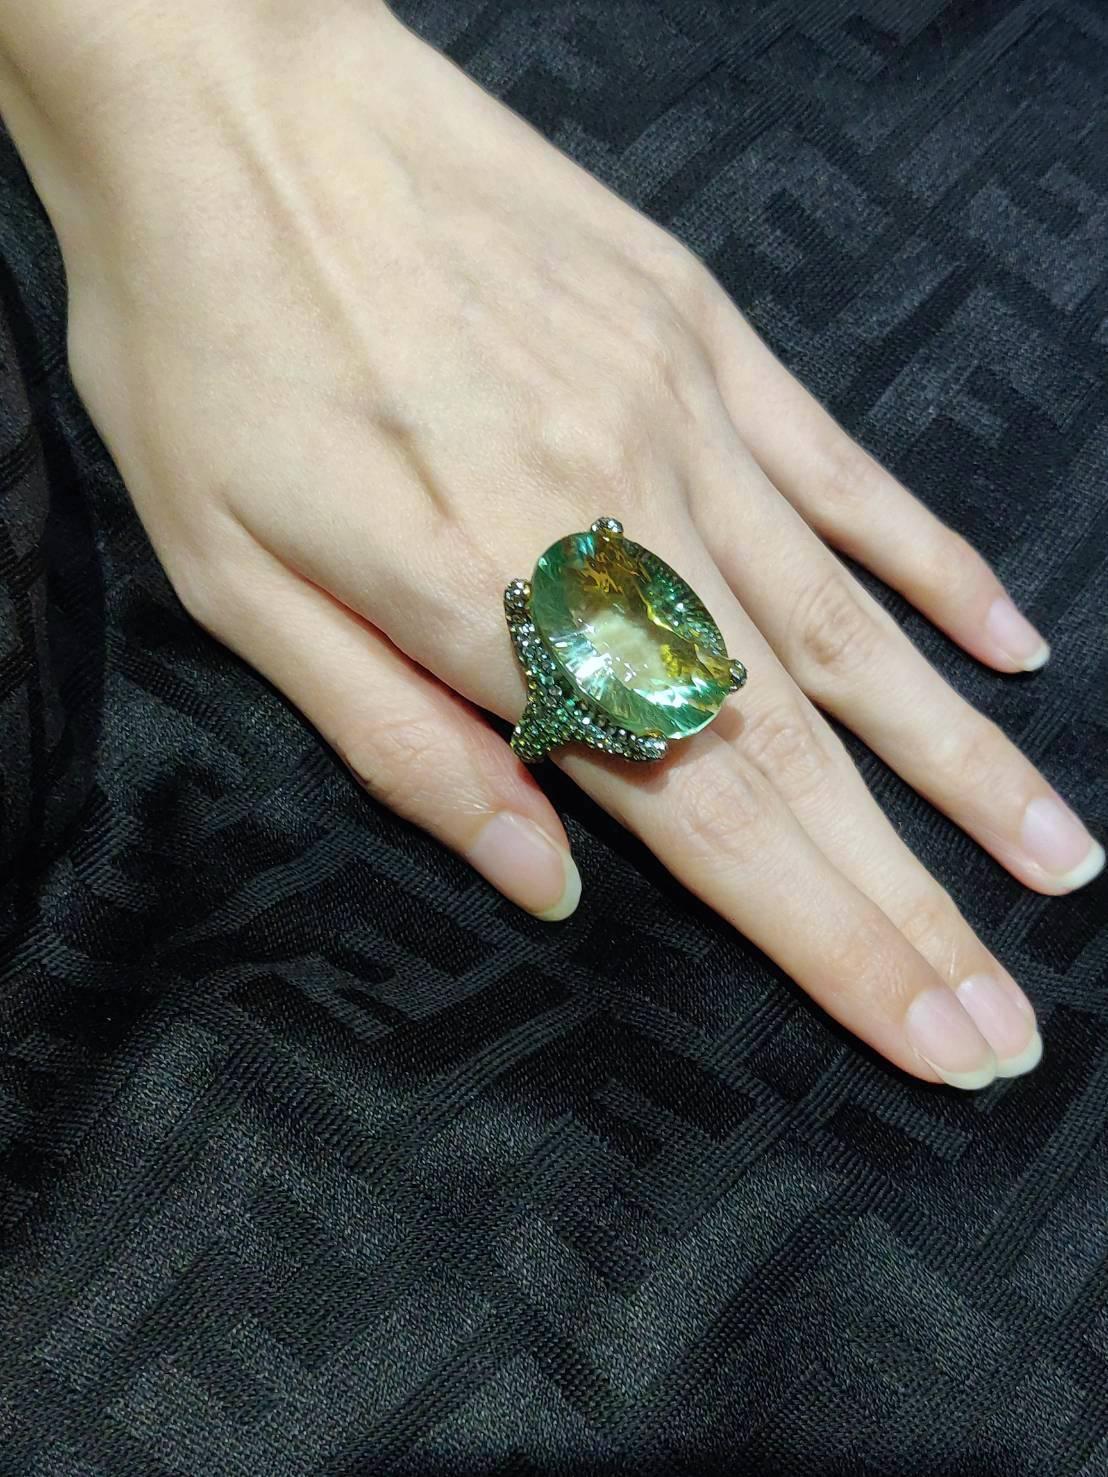 55.94 Carat Fluorite Ring with Aquamarine and Tsavorite Pavé Claw Ring in 18K Yellow Gold

This ring can be resized -- Simply let us know upon check-out.

Size: US 6.5 / 52.5

Fluorite: 55.94 ct
Aquamarine and Tsavorite: 5.91 ct
Gold: 18K Yellow